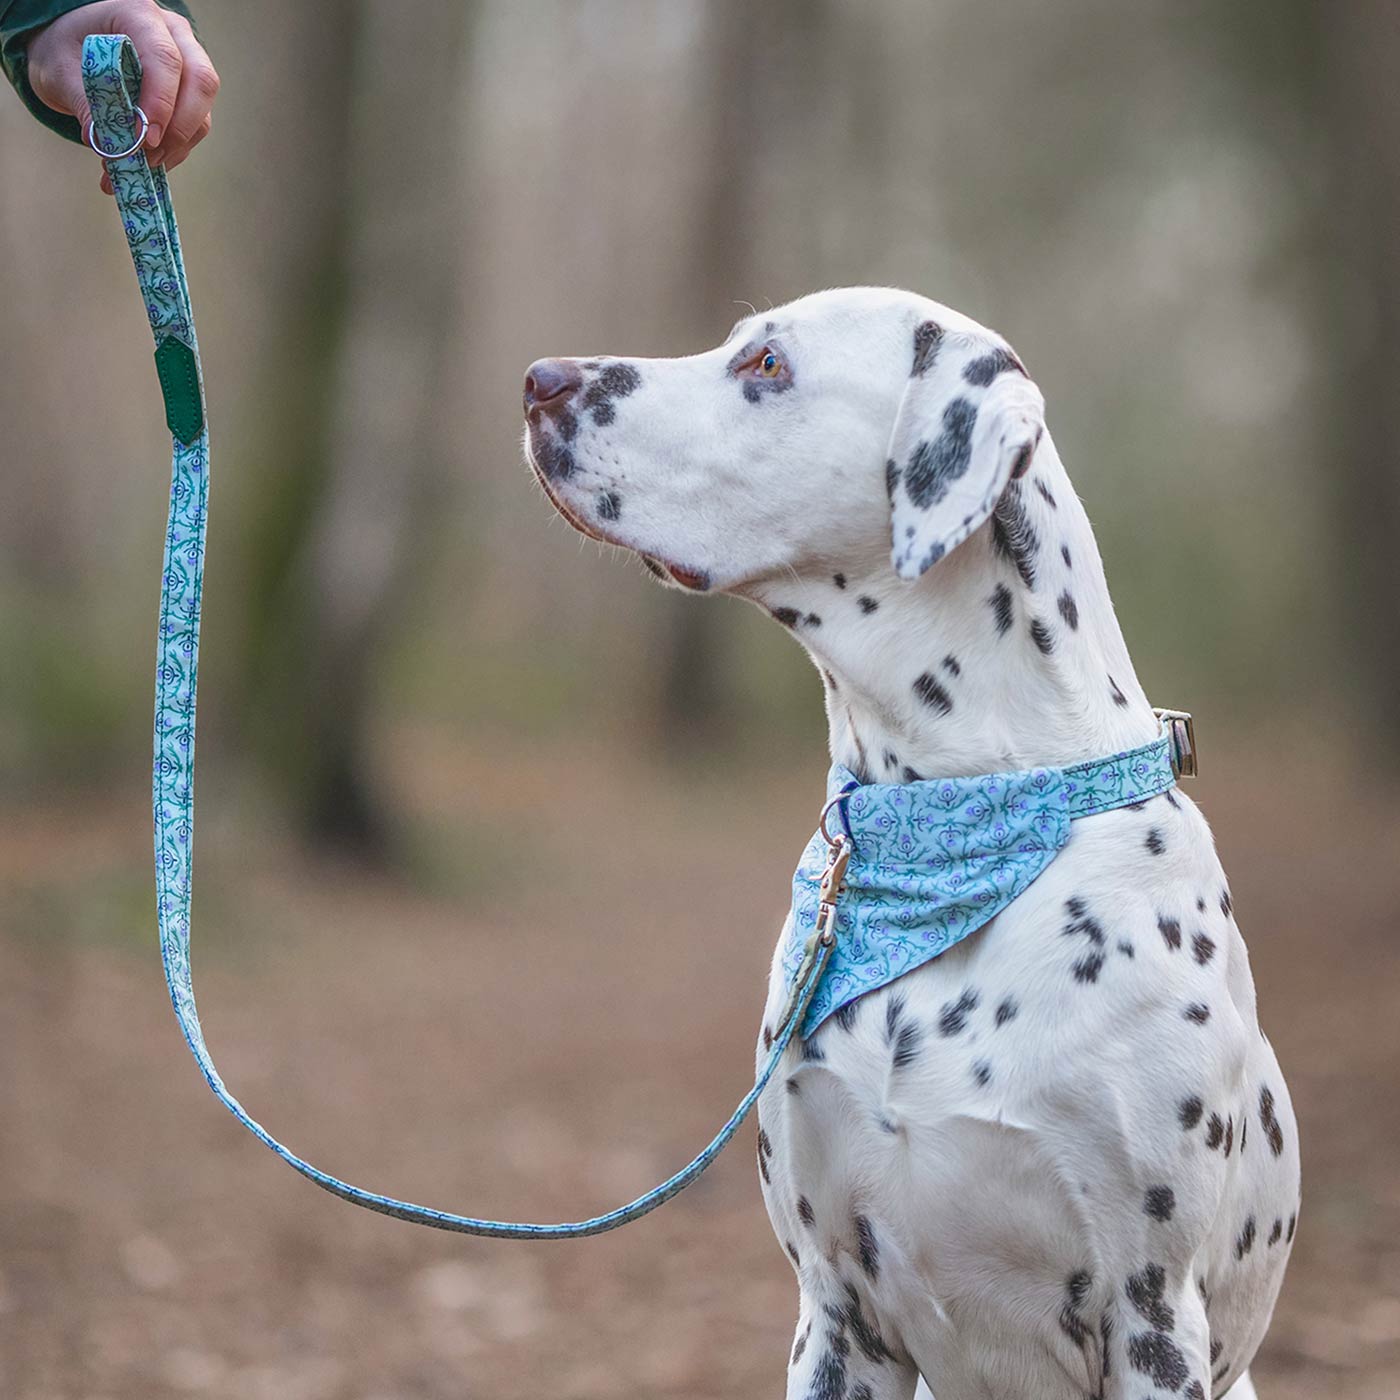 [colour:stag] Set & accessorise your pooch ready for a stylish dog walk with Hiro + Wolf X L&L Dog Bandana, the perfect dog walking accessory! Made using strong webbing lining to provide extra strength! Available in 3 stylish designs and 2 sizes at Lords & Labradors